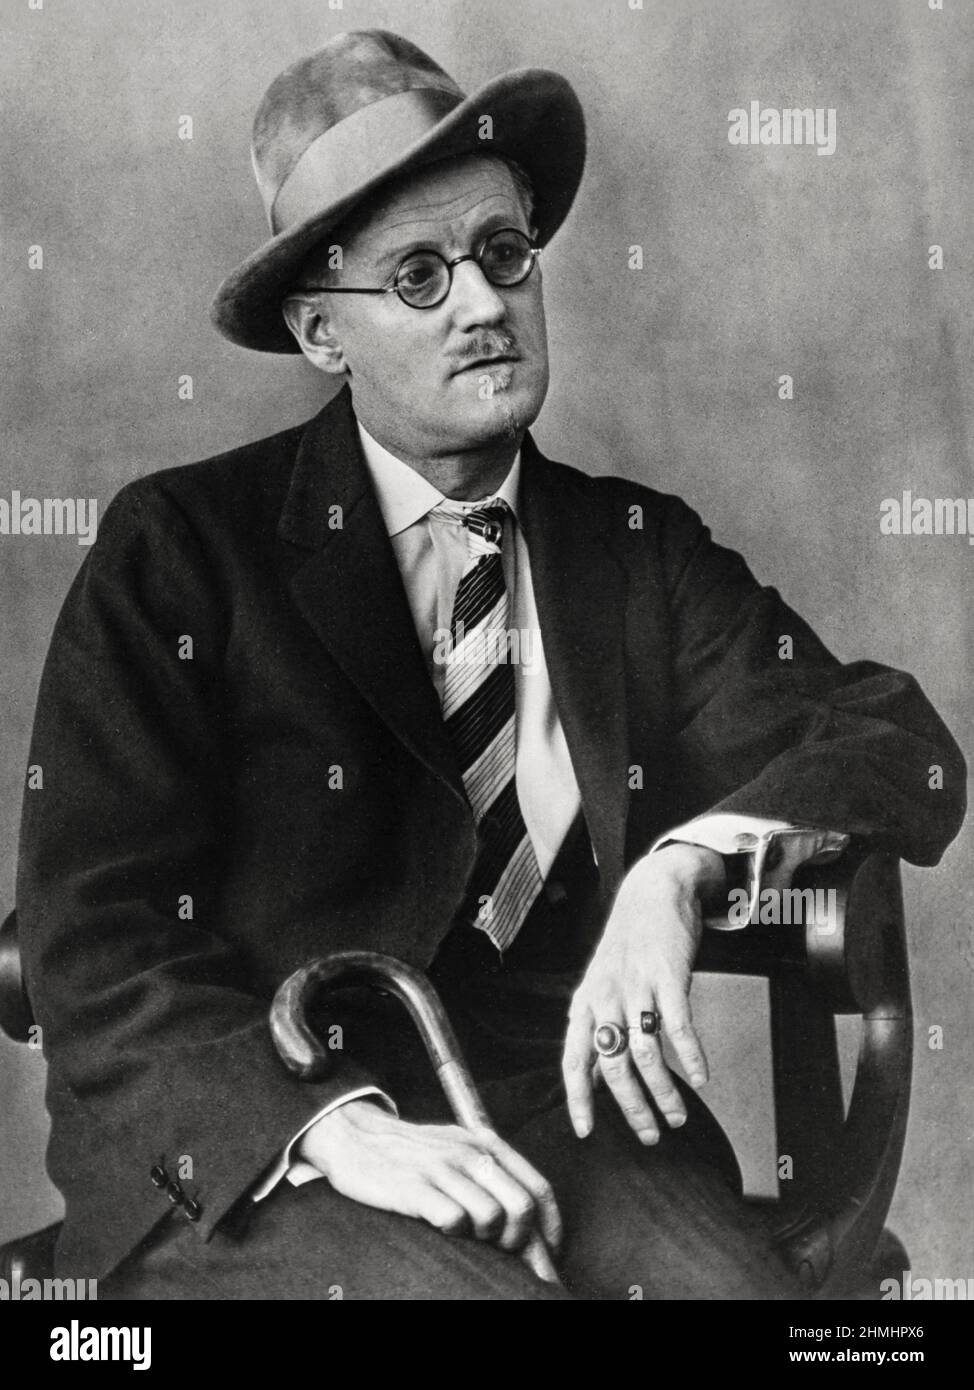 James Joyce (1882-1941) influential Irish writer whose novel Ulysses is widely considered one of the most important works of modernist literature. Stock Photo